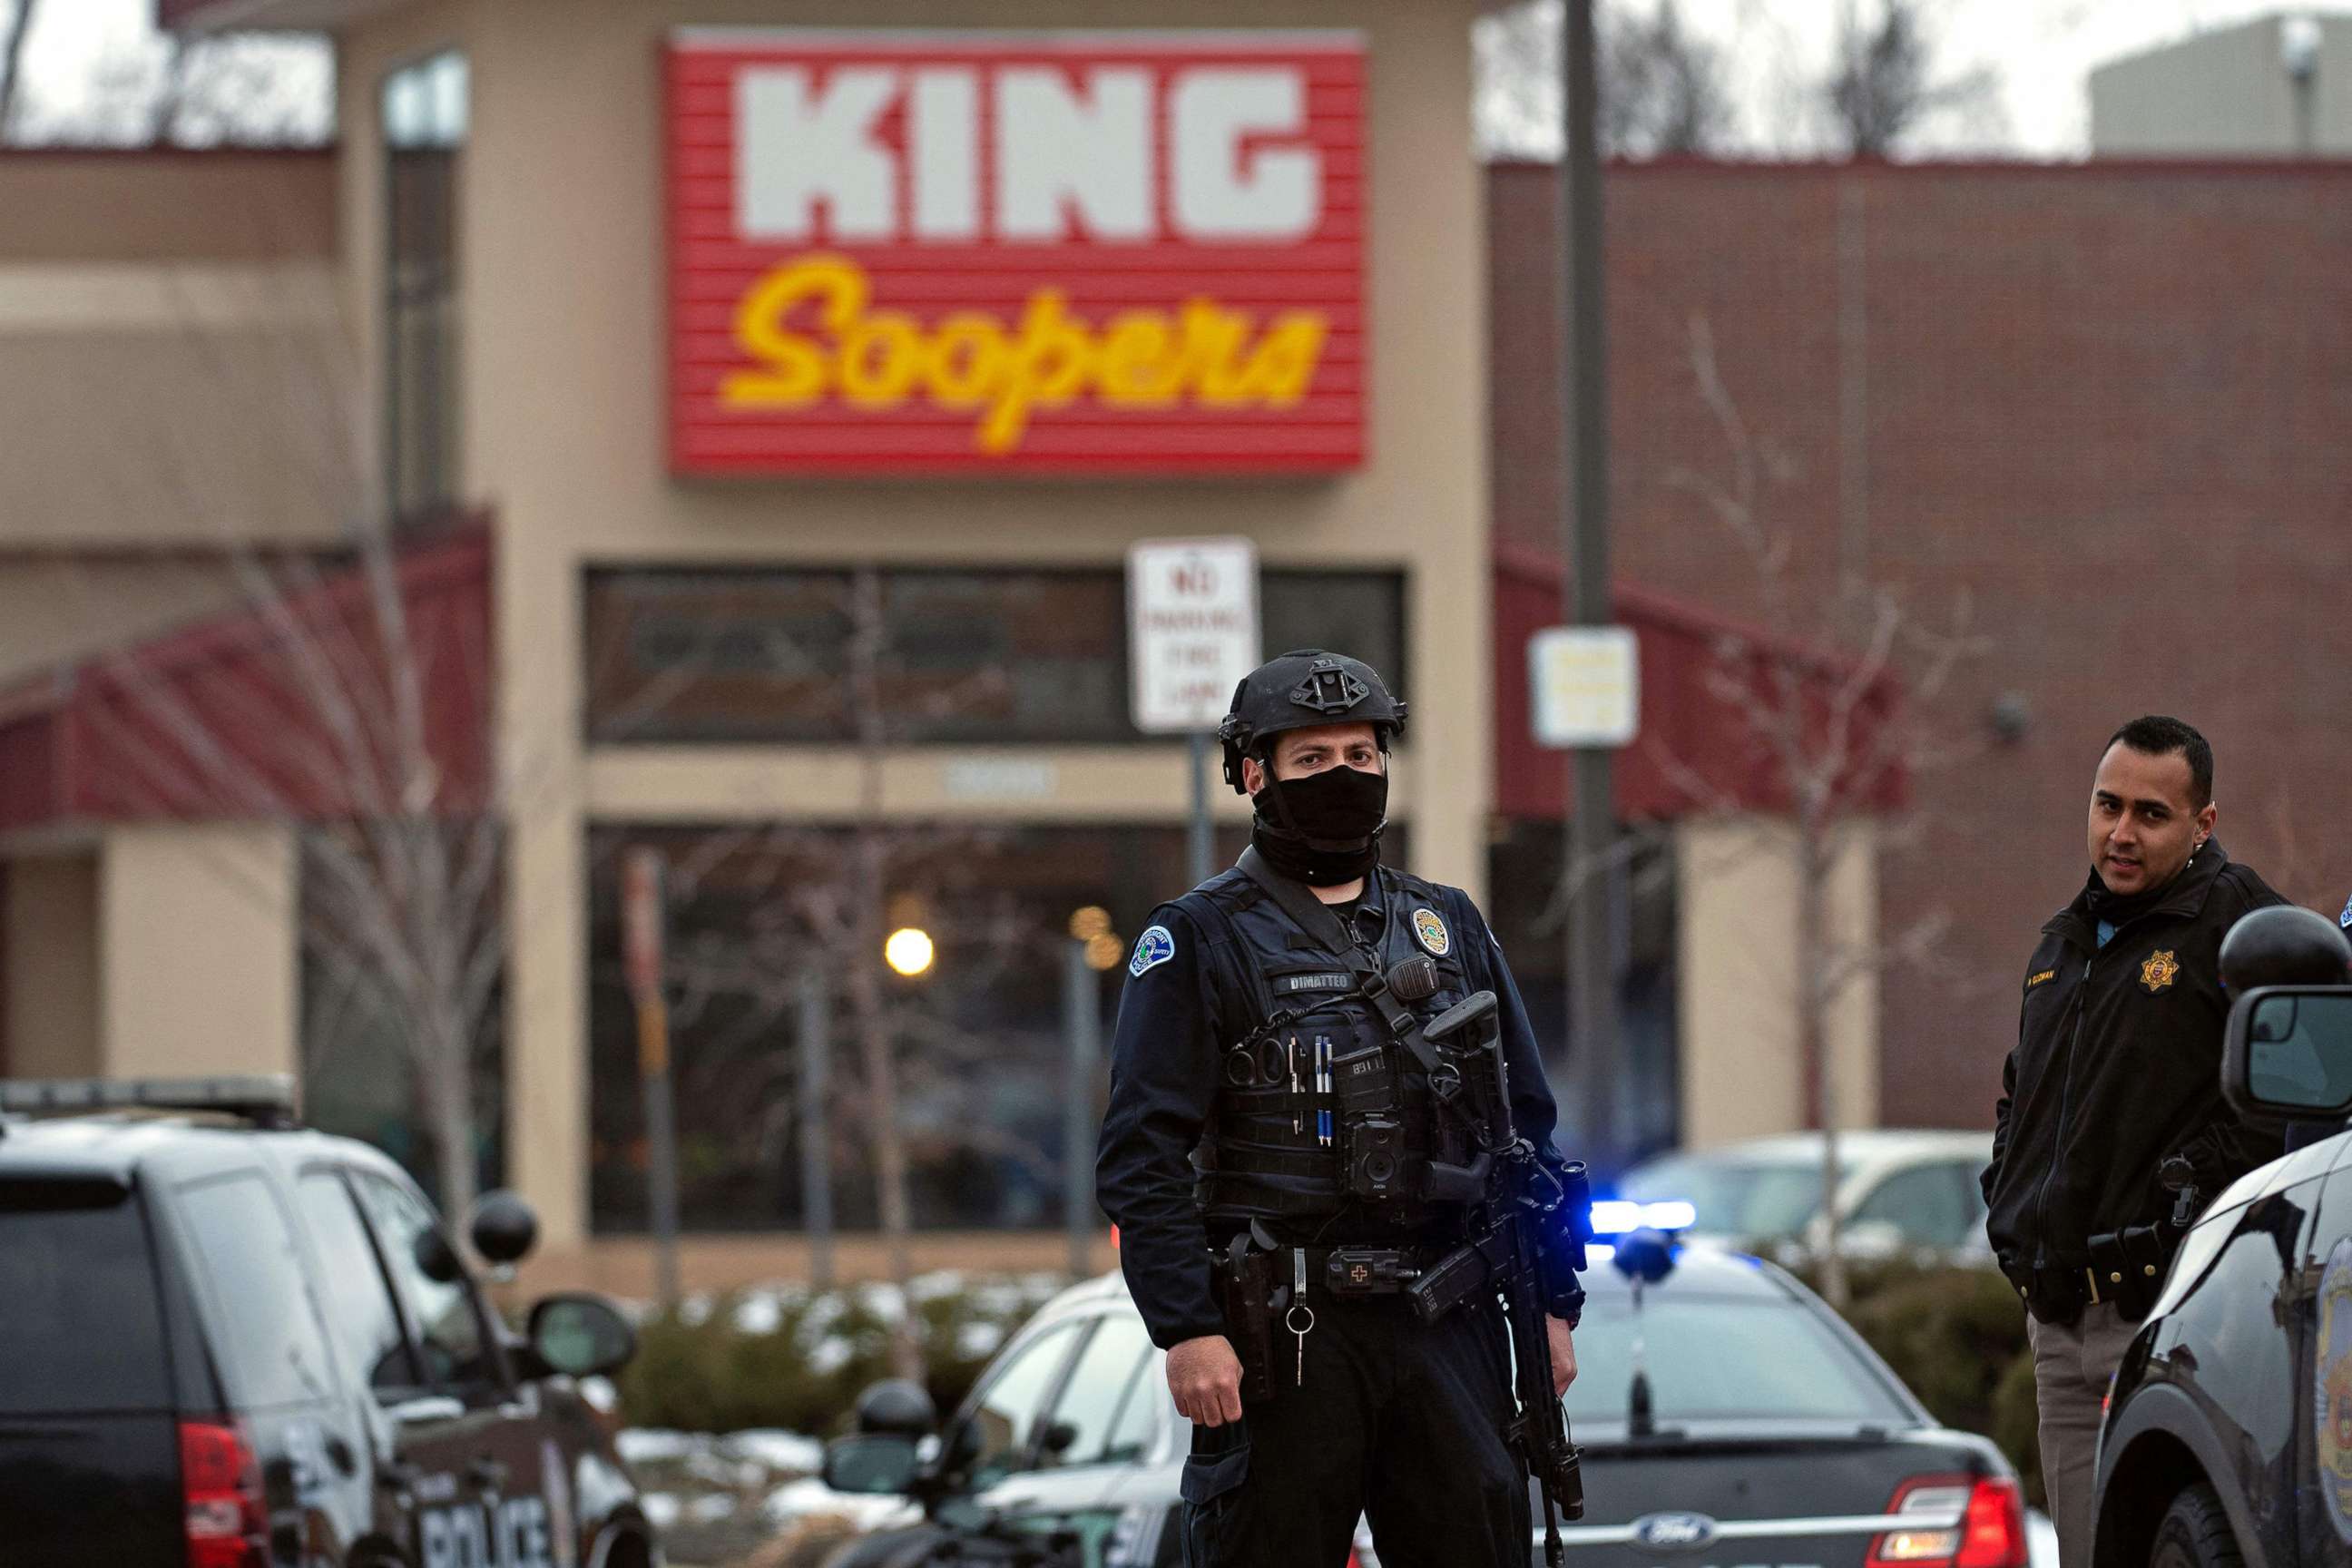 PHOTO: Police officers secure the perimeter of the King Soopers grocery store in Boulder, Colo., March 22, 2021, after reports of an active shooter.